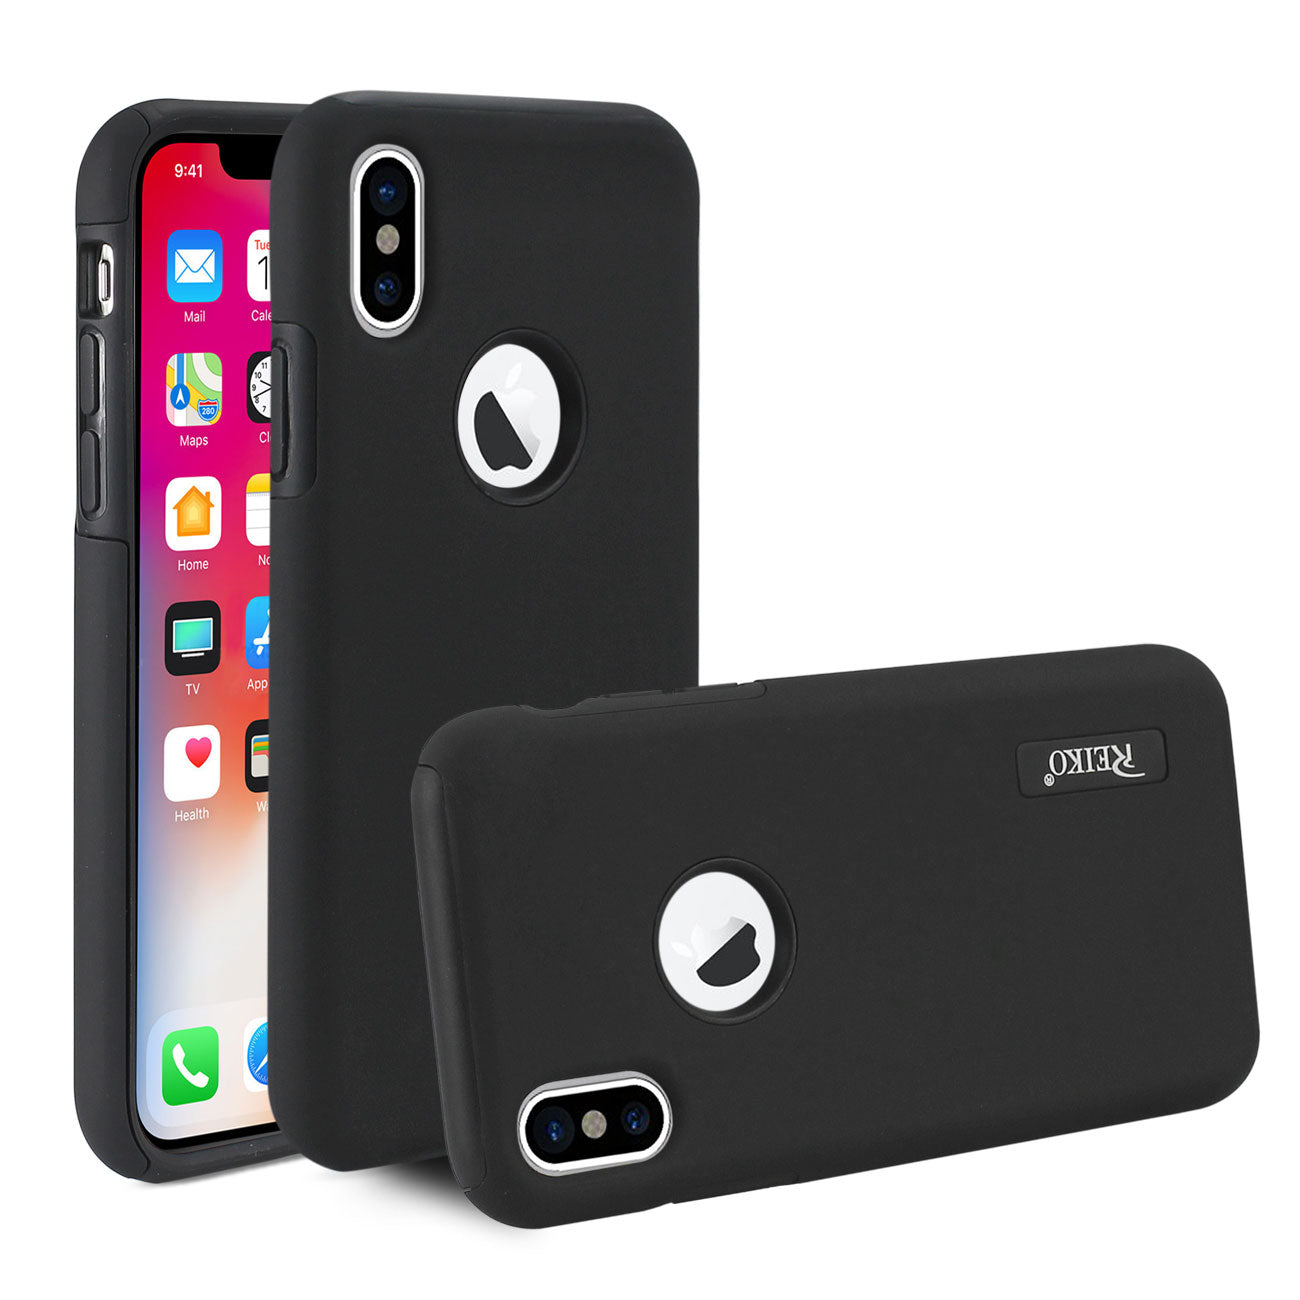 iPhone X/iPhone XS SOLID ARMOR DUAL LAYER PROTECTIVE CASE IN BLACK